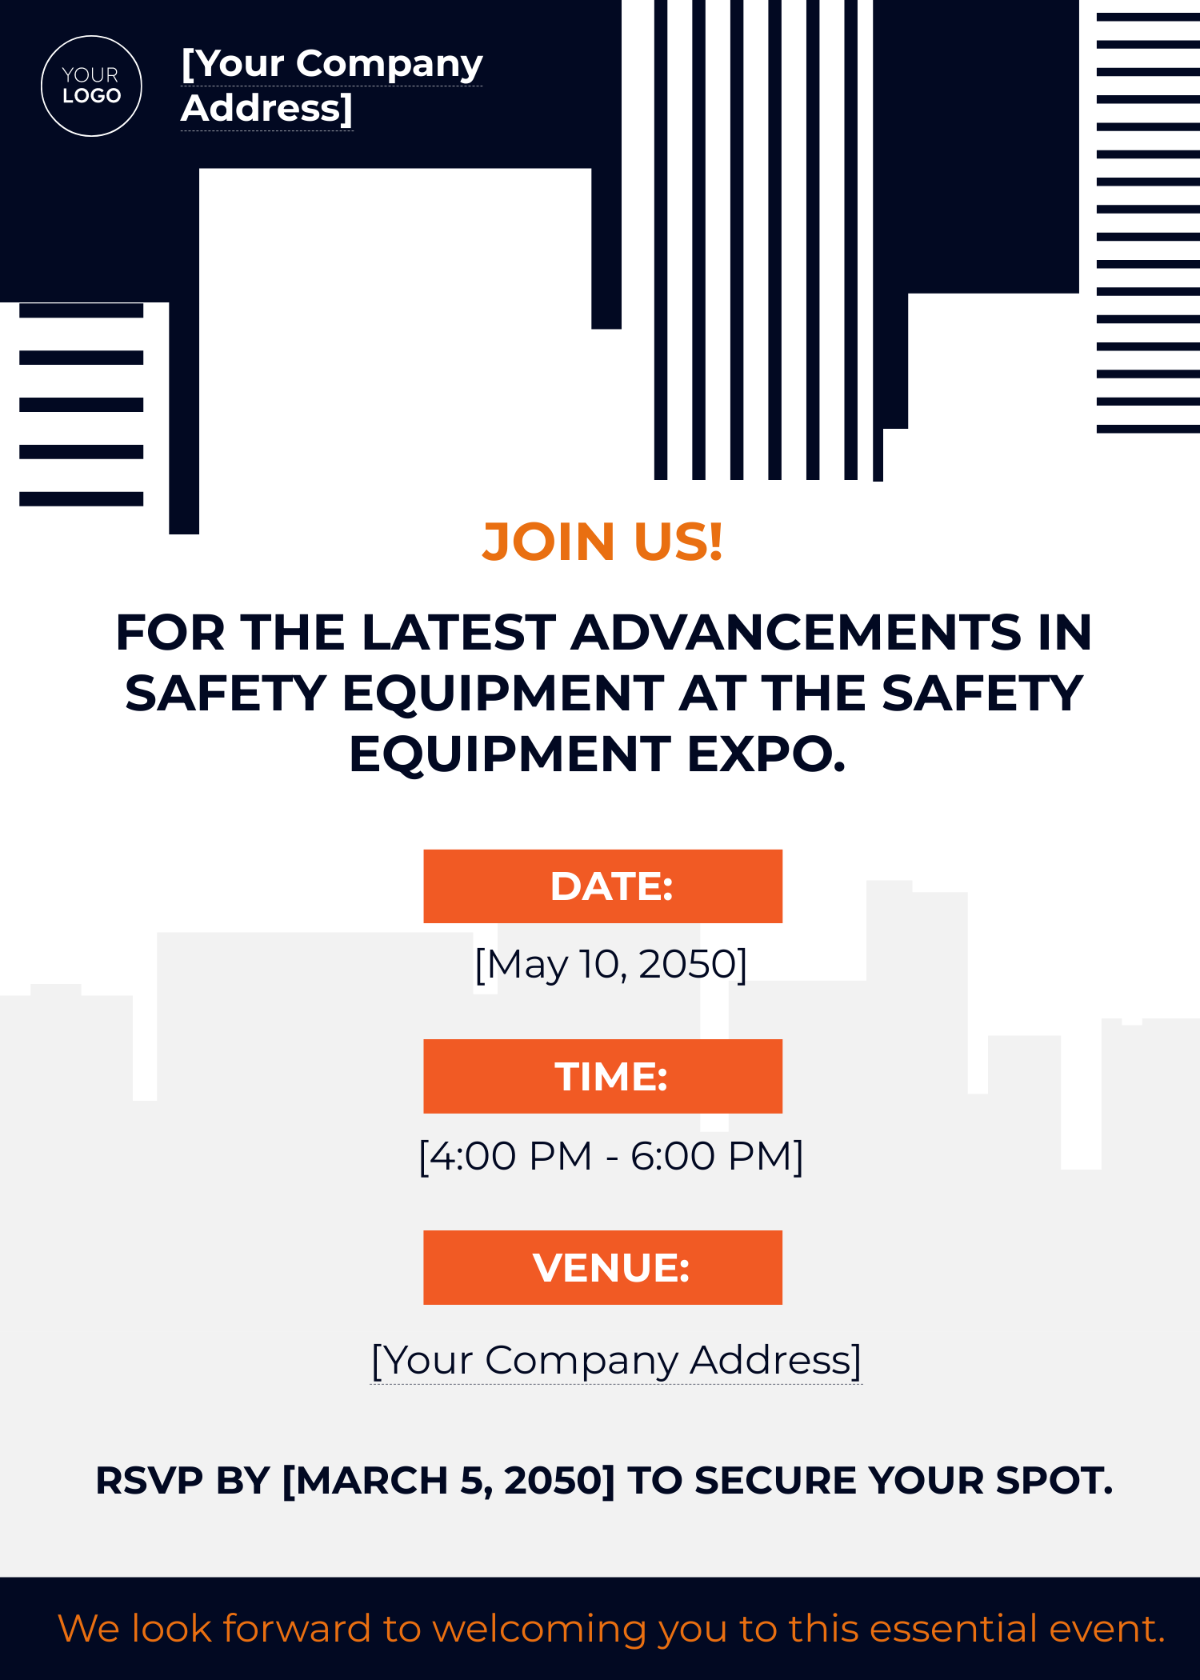 Safety Equipment Expo Invitation Card Template